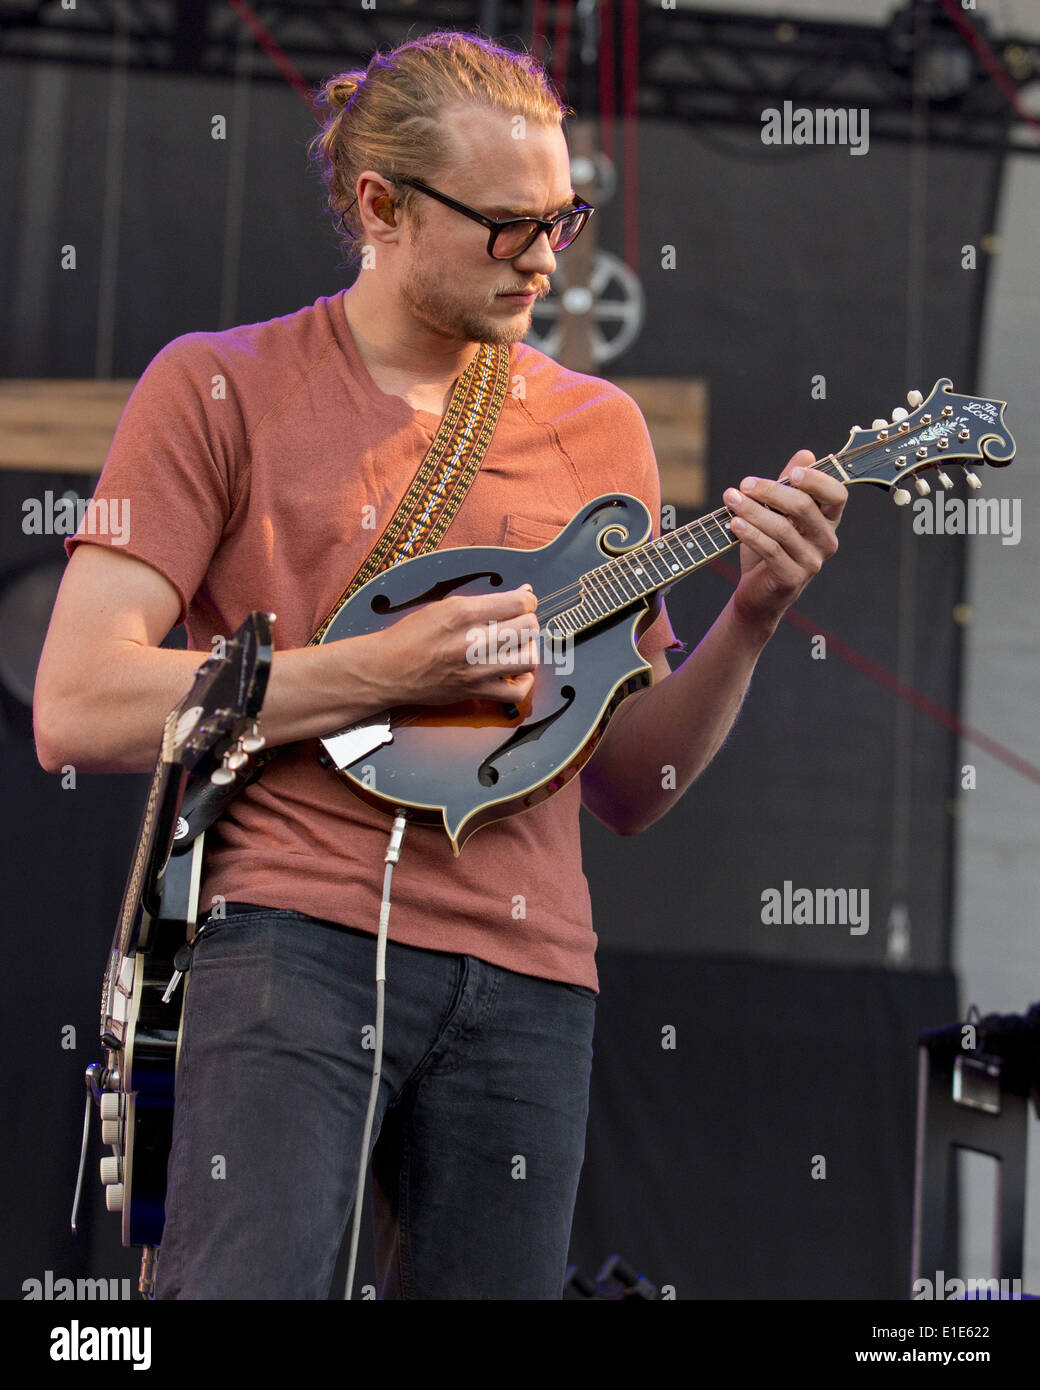 Chicago, Illinois, USA. 31st May, 2014. MARK NOSEWORTHY performs with Edward Sharpe and the Magnetic Zeros at the FirstMerit Bank Pavilion at Northerly Island in Chicago, Illinois © Daniel DeSlover/ZUMAPRESS.com/Alamy Live News Stock Photo